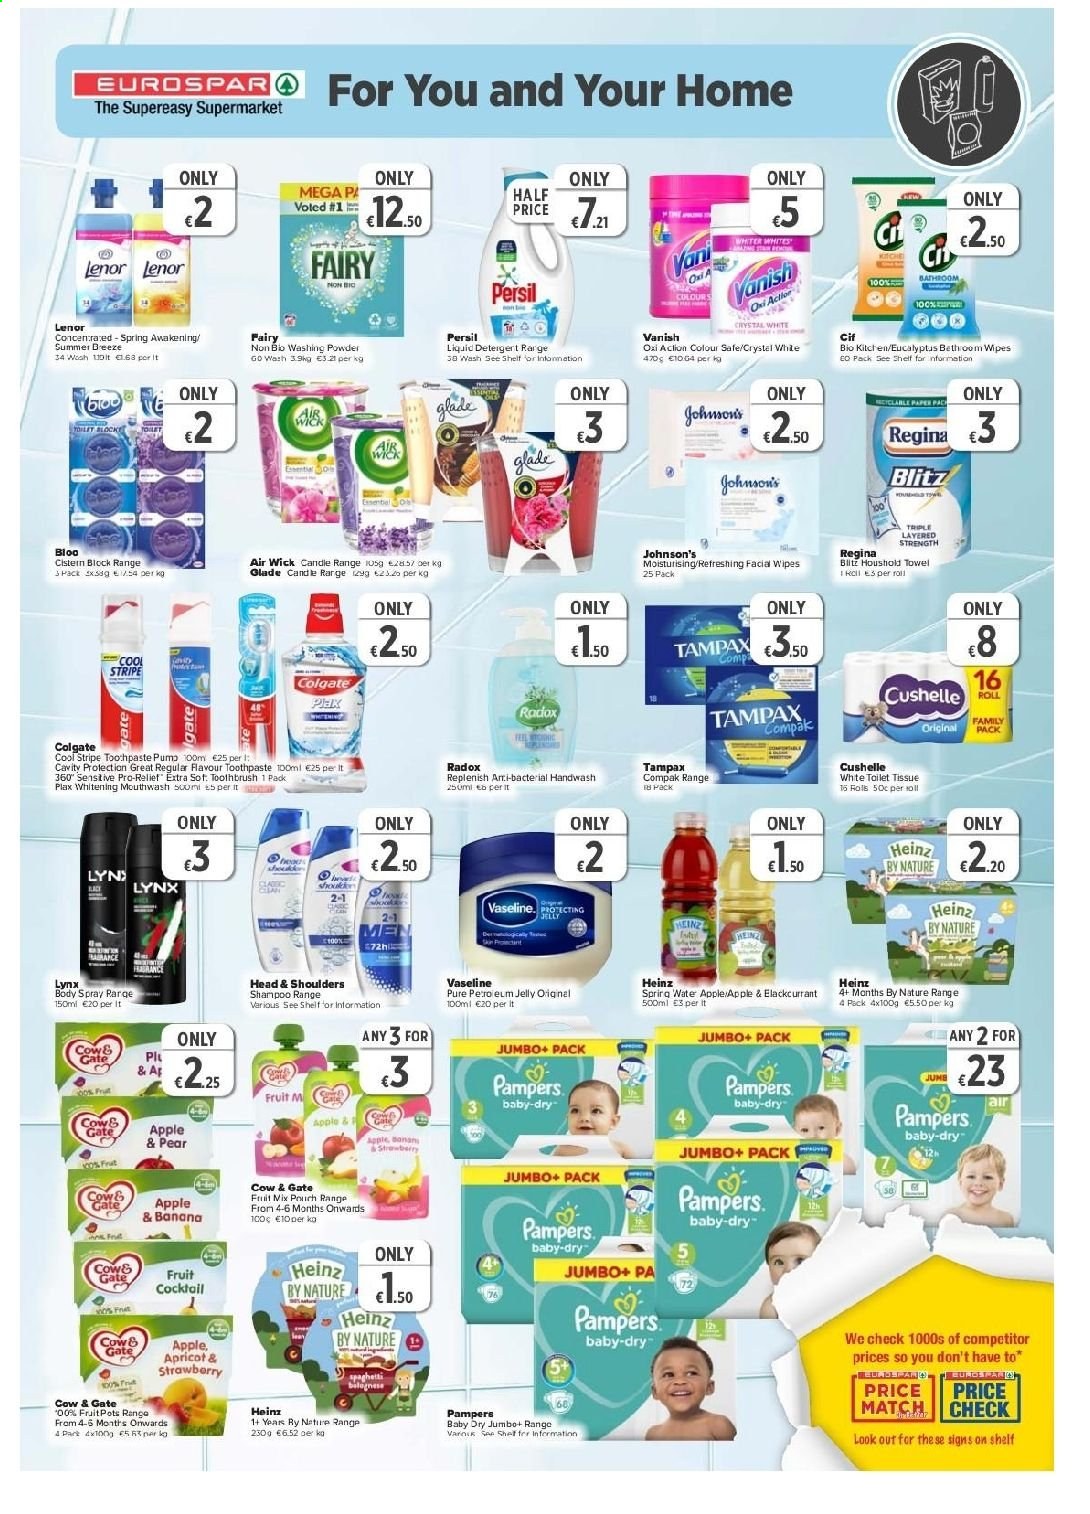 EUROSPAR offer  - 29.7.2021 - 18.8.2021 - Sales products - spaghetti, fruit mix, jelly, Heinz, wipes, Pampers, Johnson's, tissues, Cushelle, Fairy, Cif, Vanish, Persil, laundry powder, Lenor, shampoo, hand wash, Radox, Vaseline, Colgate, toothpaste, mouthwash, Plax, Tampax, Head & Shoulders, body spray, paper, Air Wick, Glade, towel. Page 7.